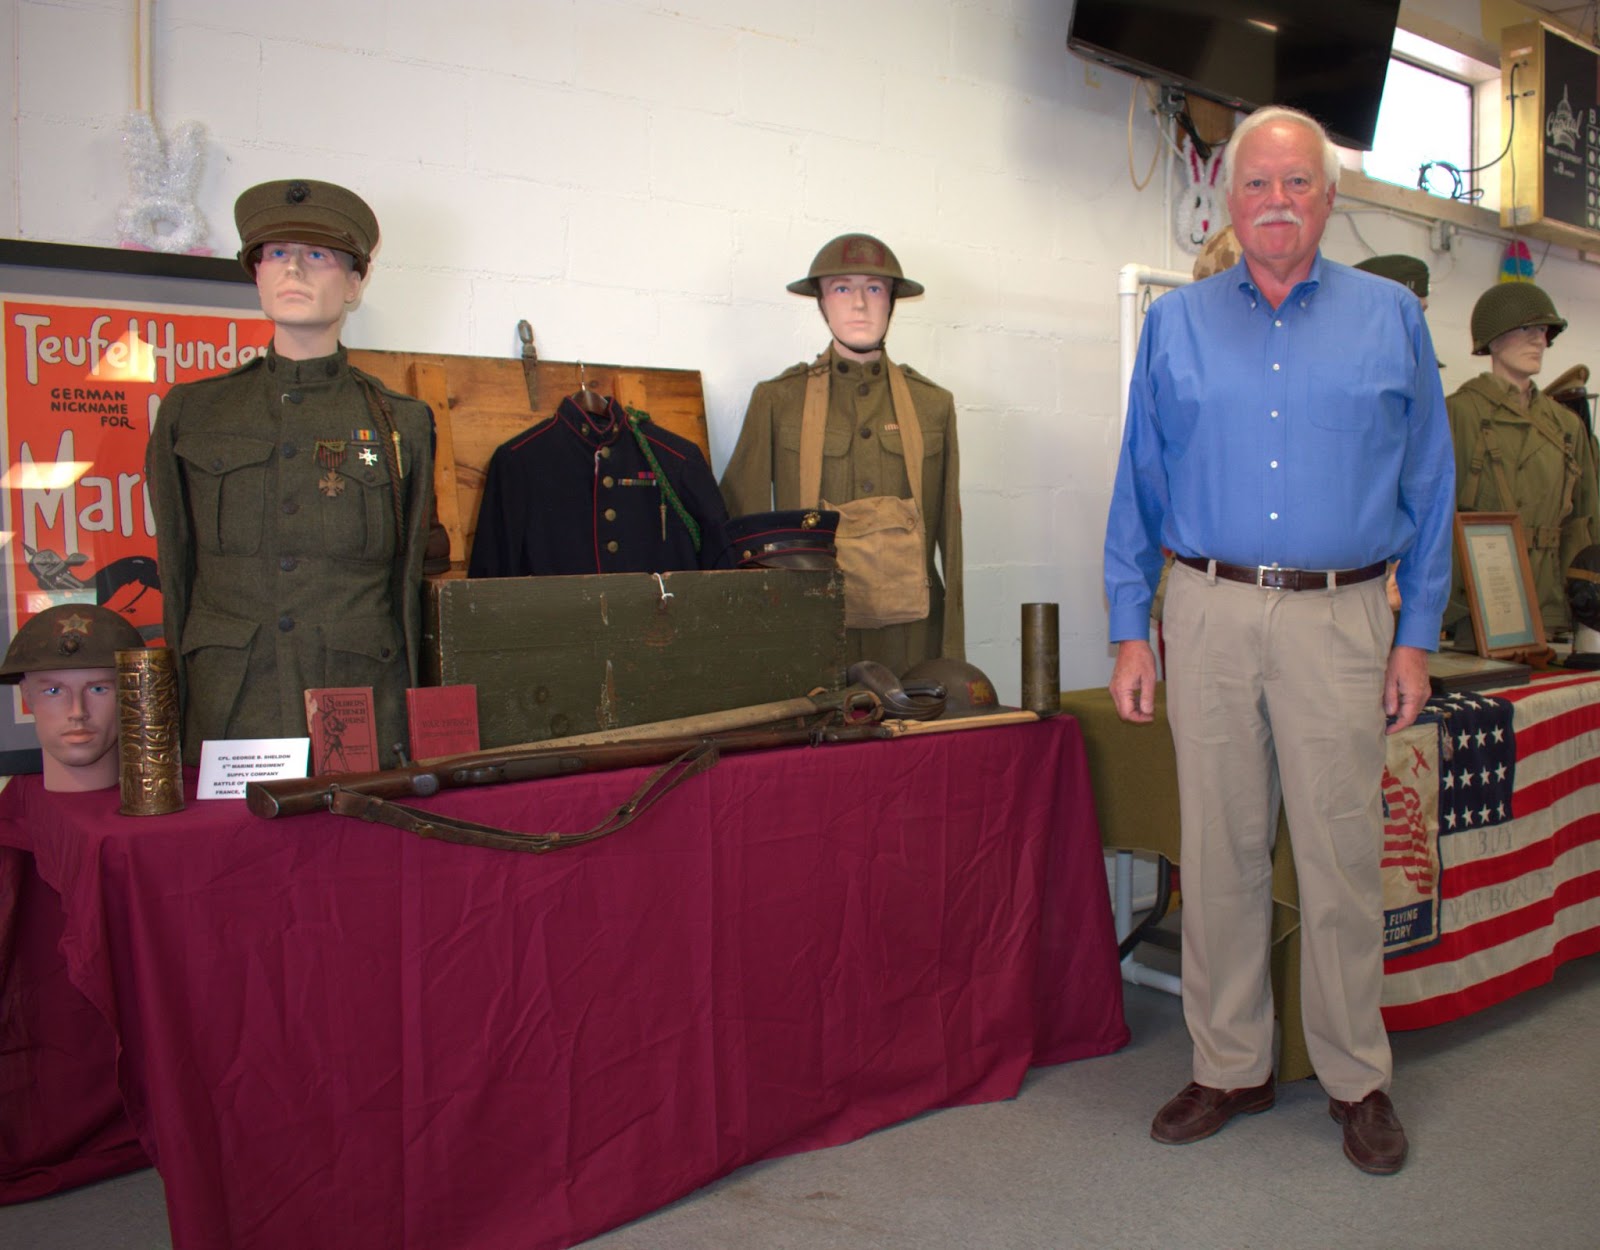 | Pics: American Military Historical Society brings military history and veterans’ experiences to life | The Paradise